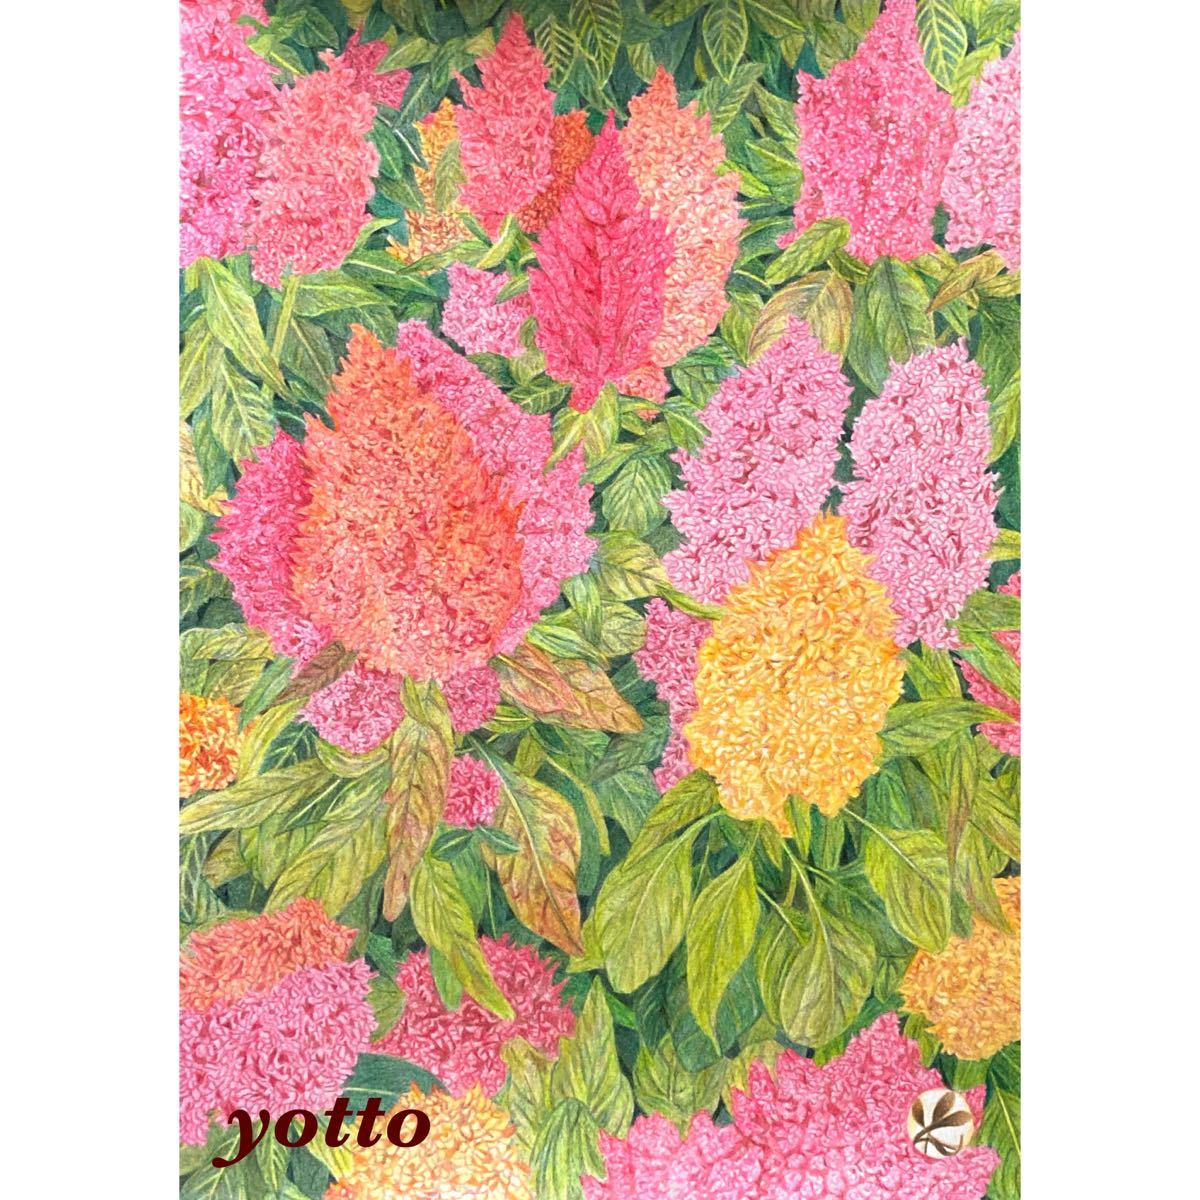 Colored pencil drawing Celosia A4, framed ◇◆Hand-drawn◇Original◆Flowers◇◆yotto, Artwork, Painting, Pencil drawing, Charcoal drawing